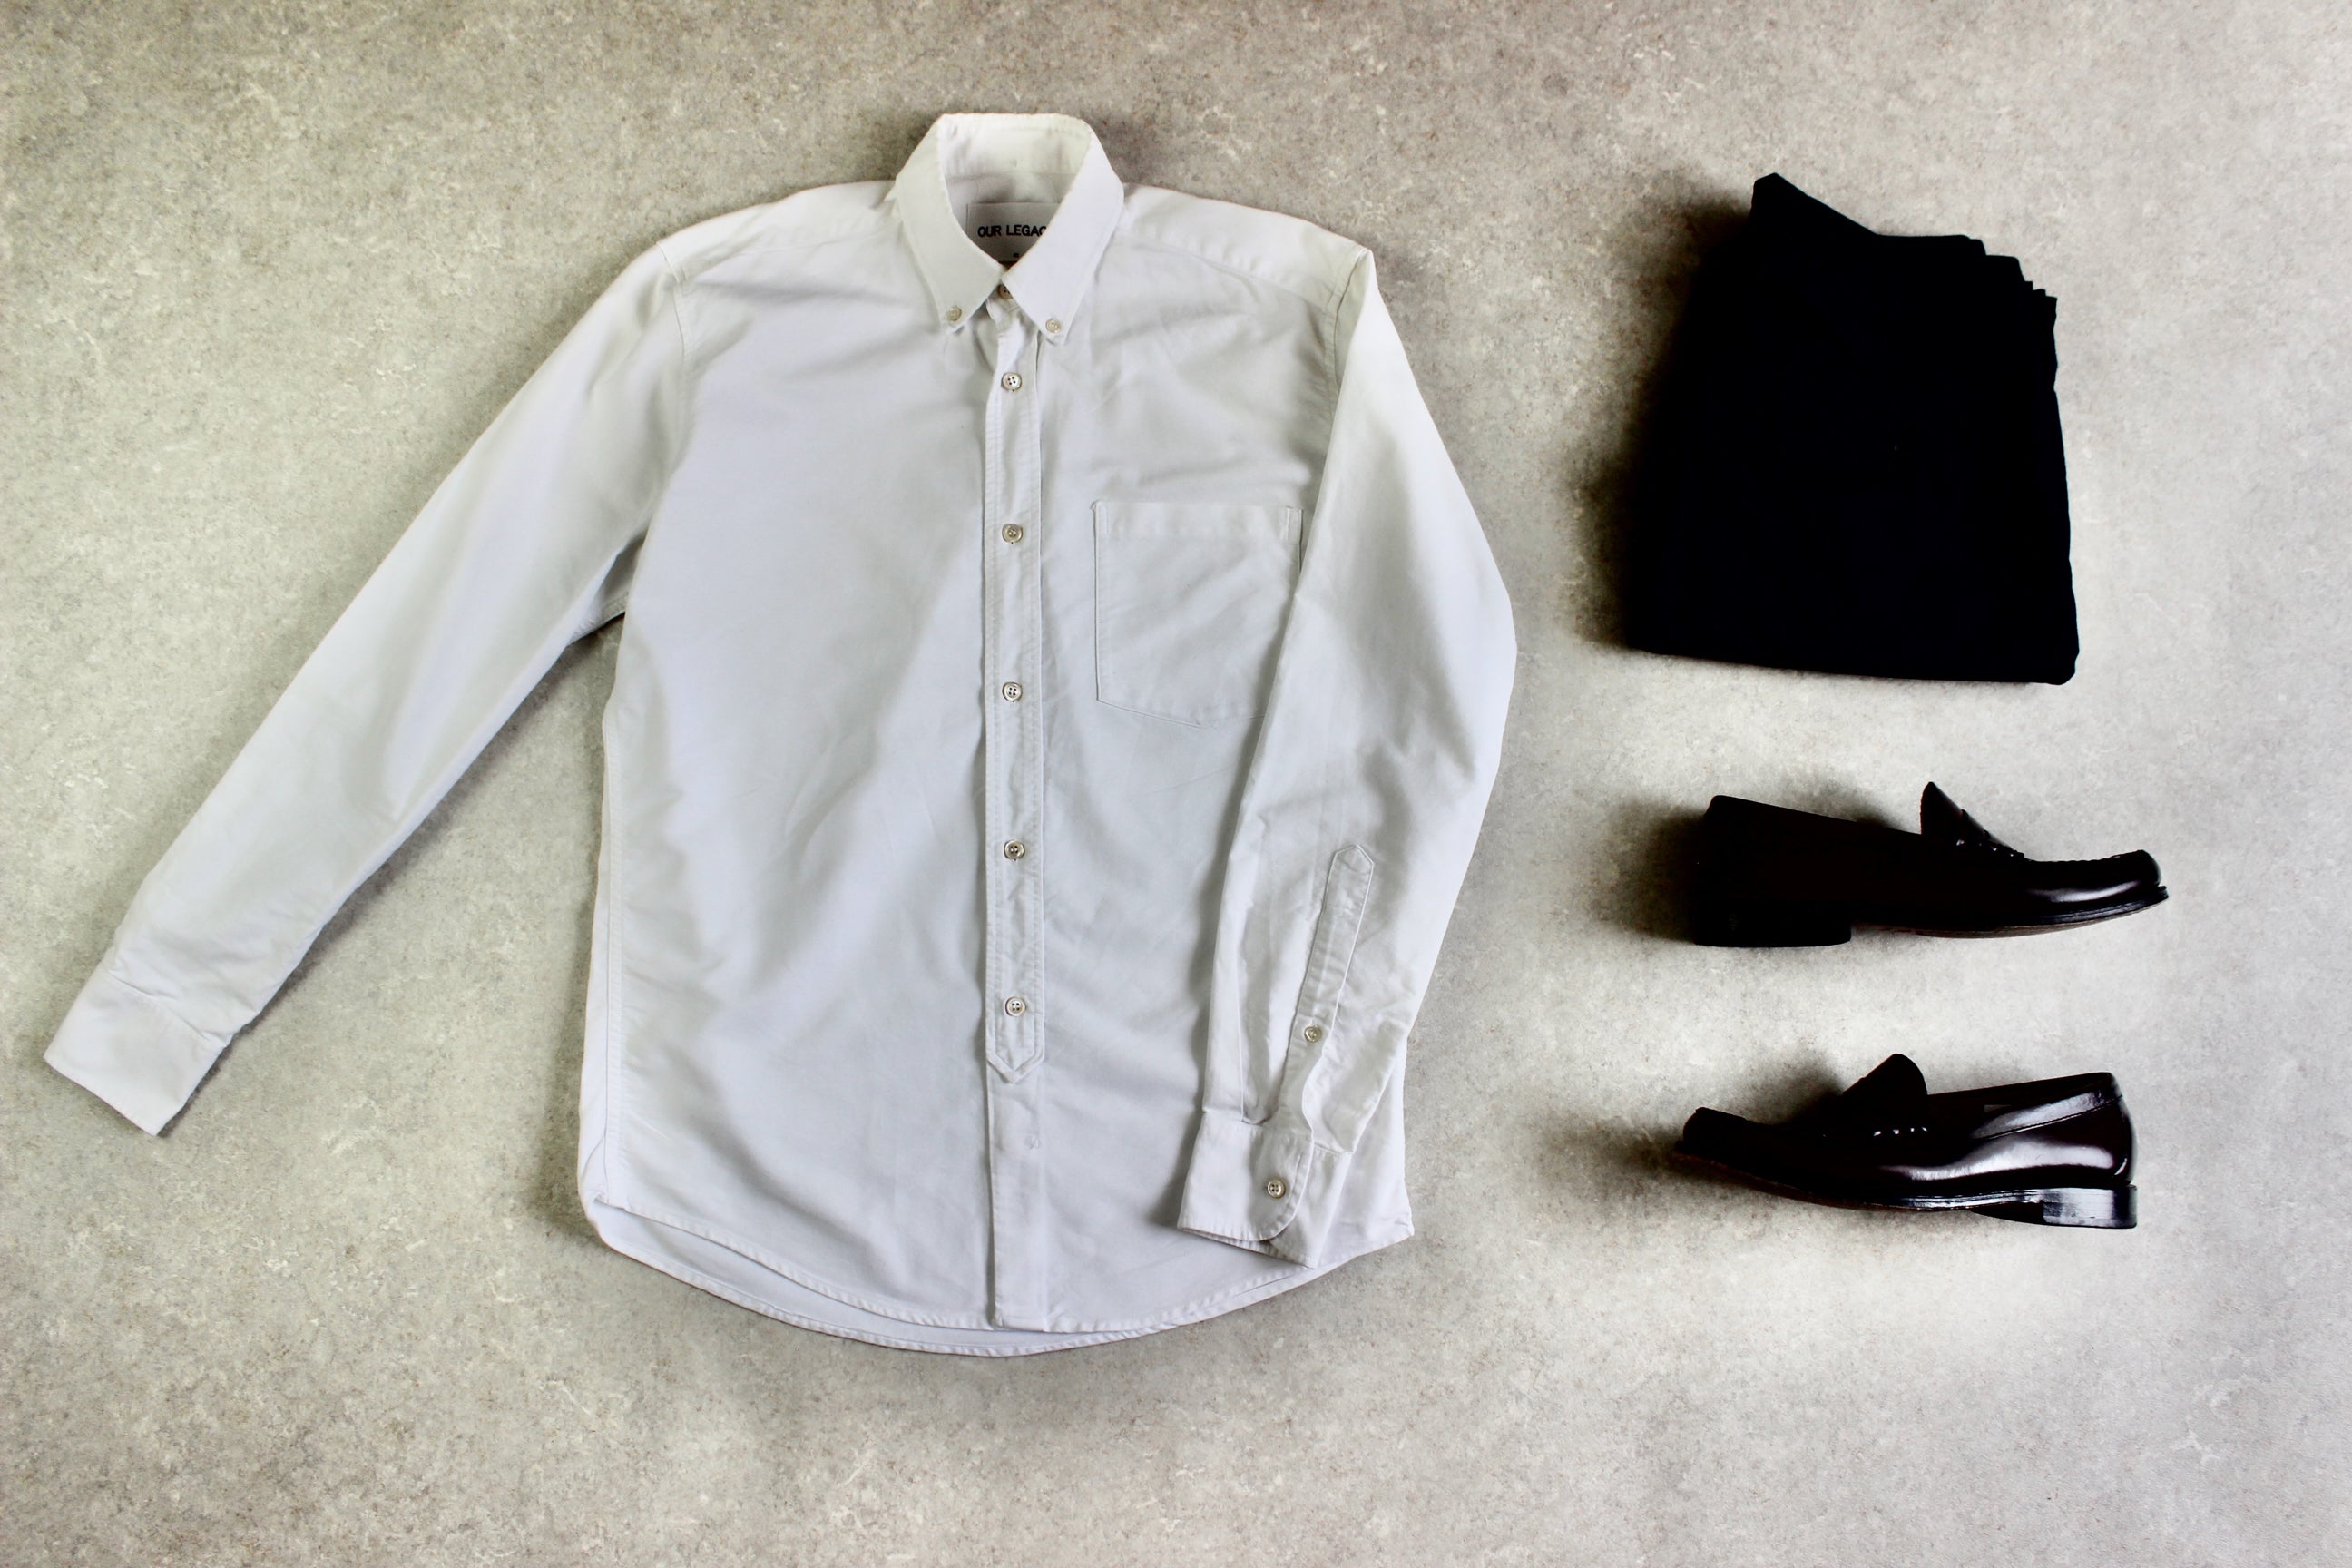 Our Legacy - Shirt - White Oxford - 46/Small